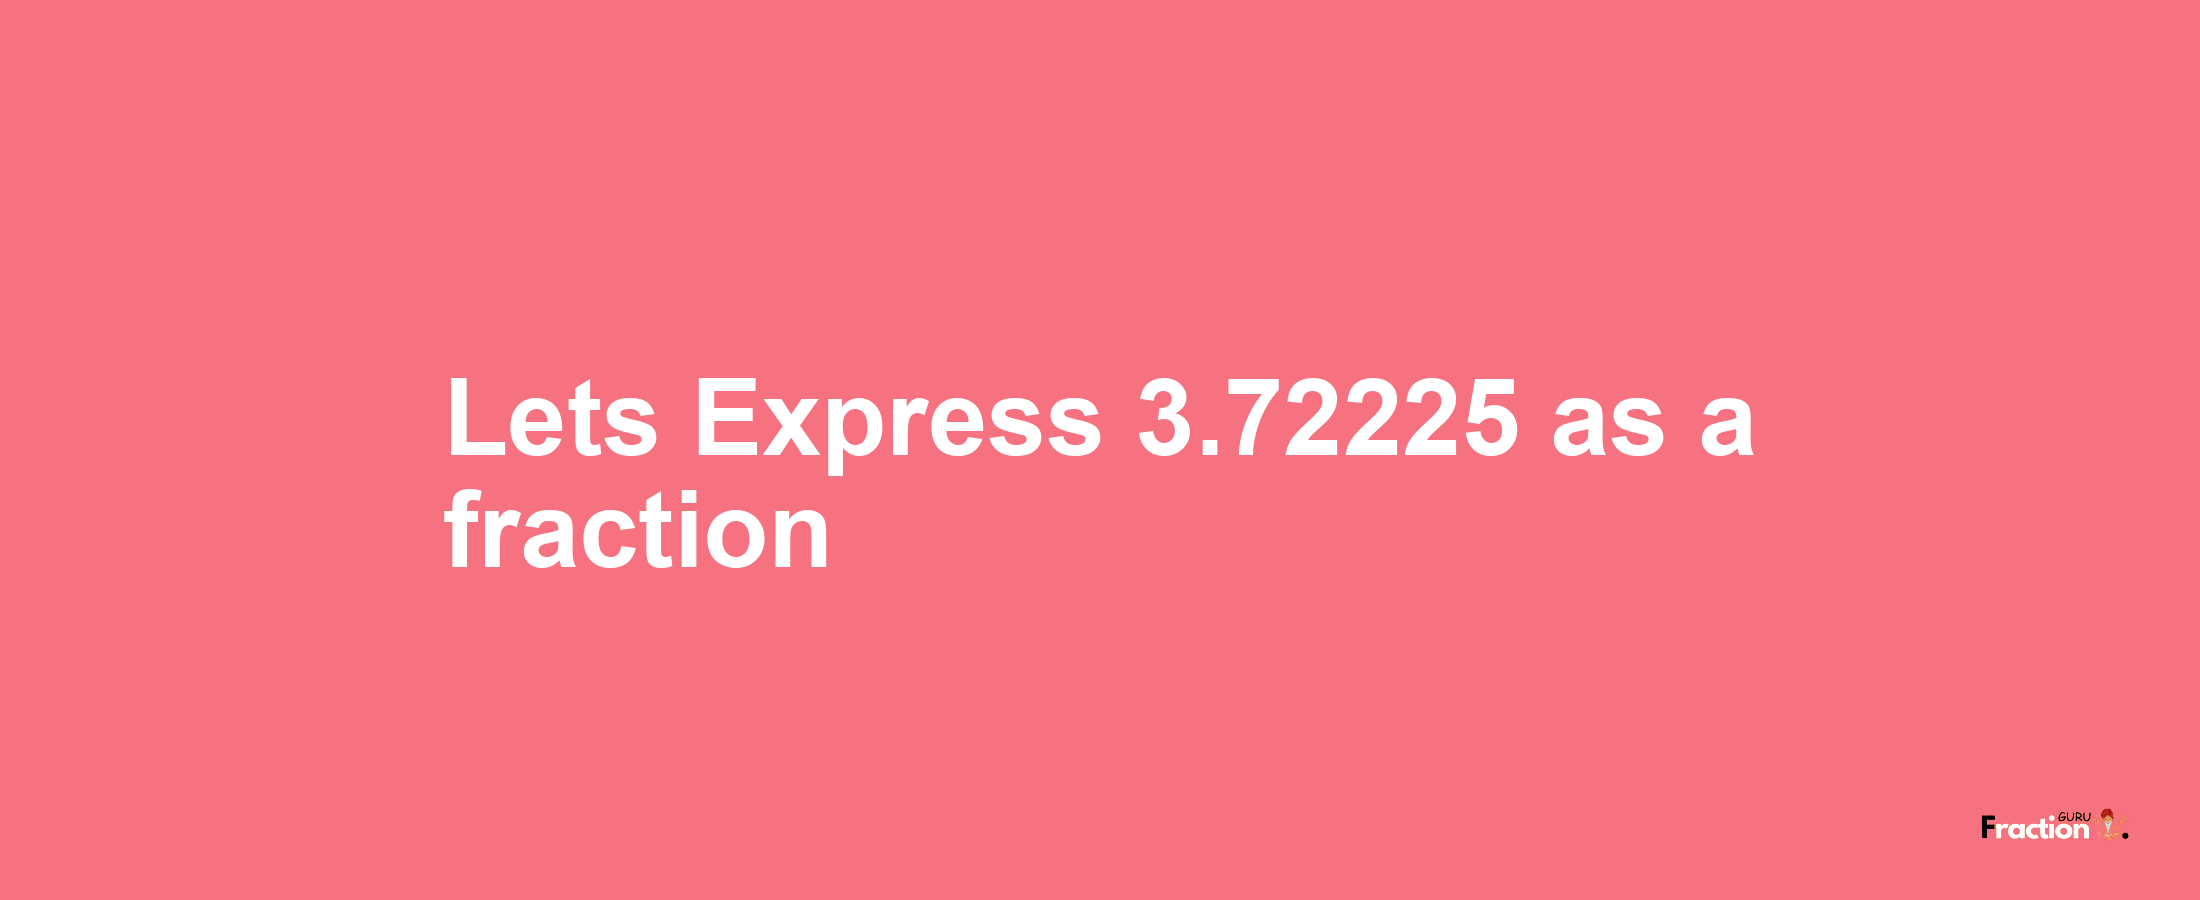 Lets Express 3.72225 as afraction